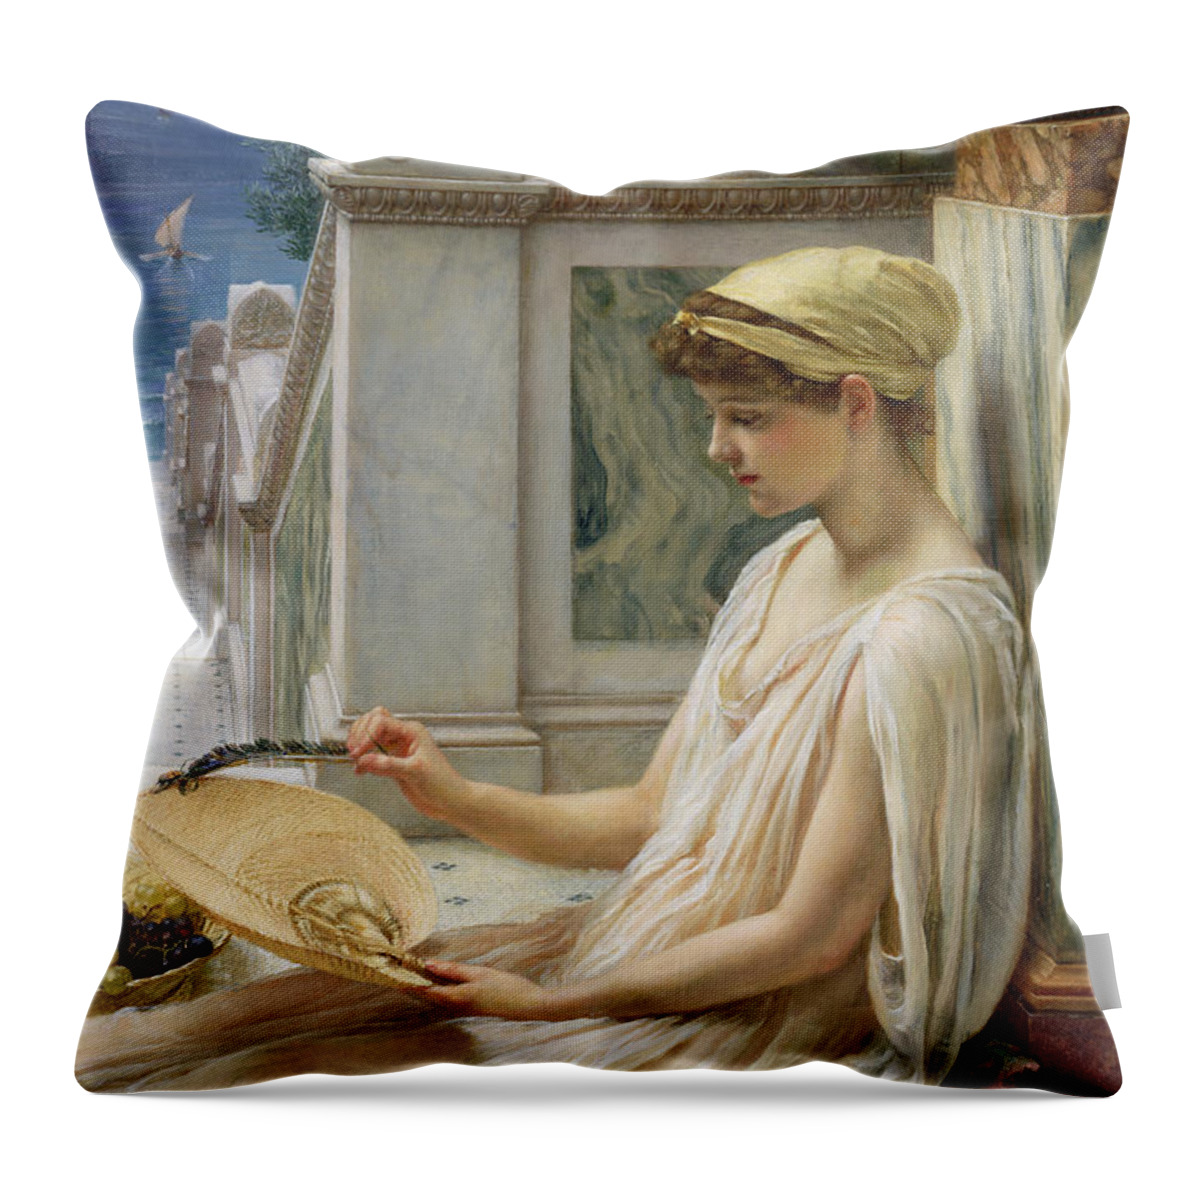 On The Terrace Throw Pillow featuring the painting On the Terrace by Edward John Poynter